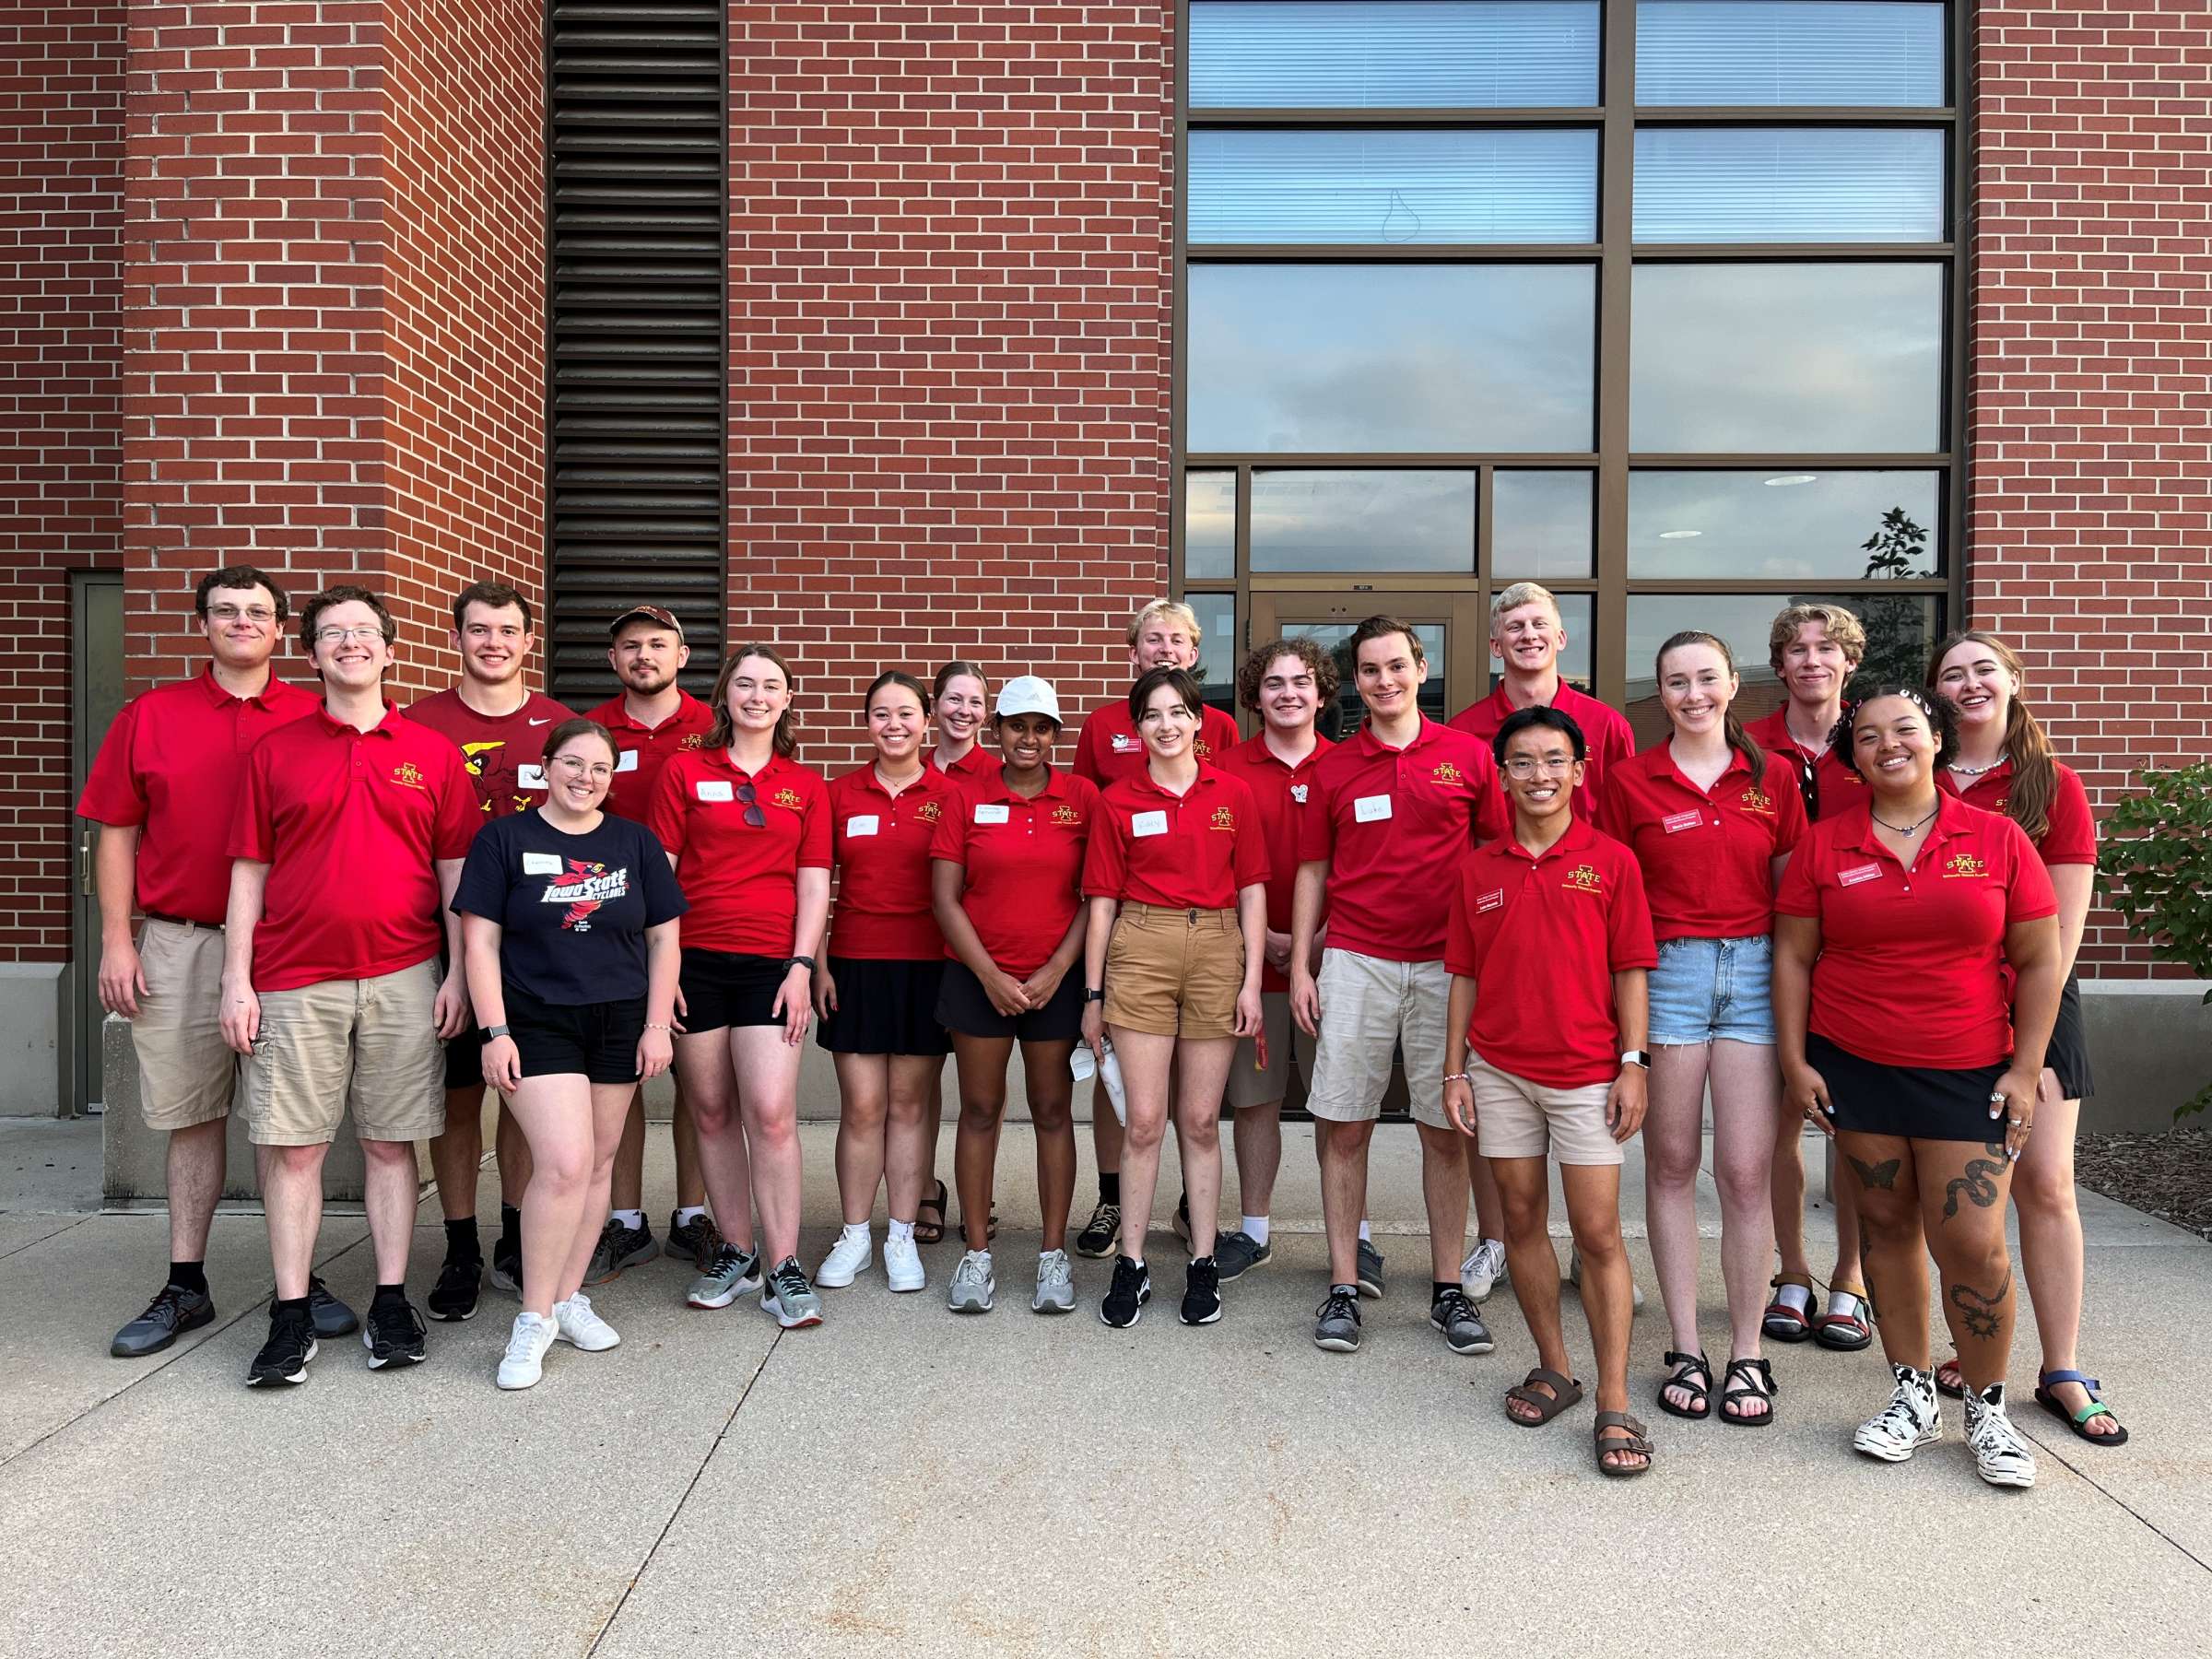 Group photo of Honors Students in their Iowa State polos.